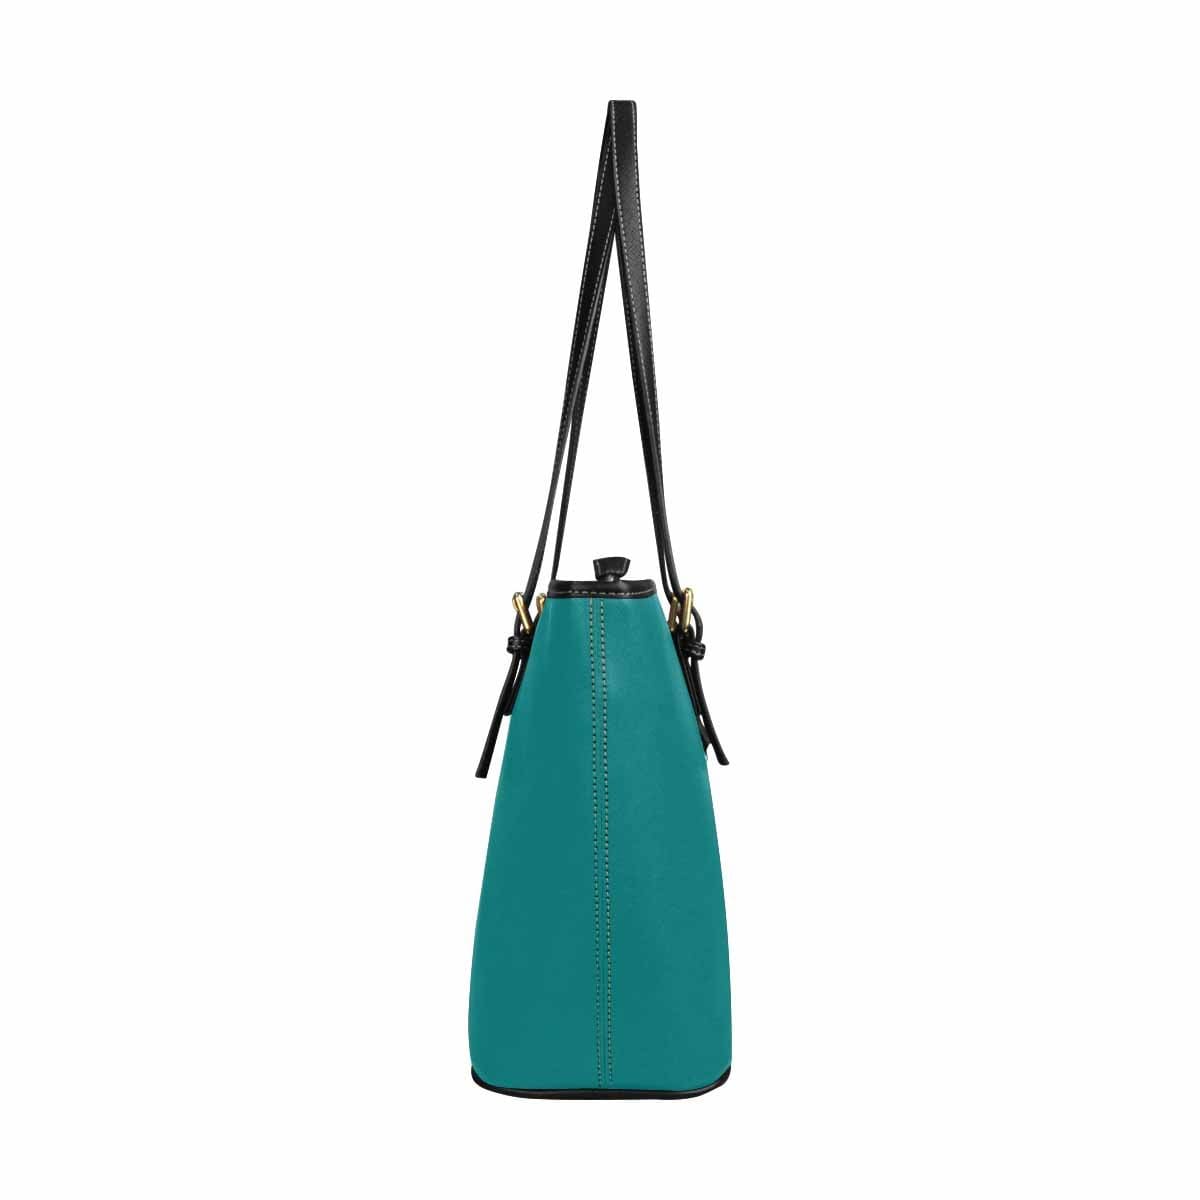 Large Leather Tote Shoulder Bag - Dark Teal Green - Bags | Leather Tote Bags